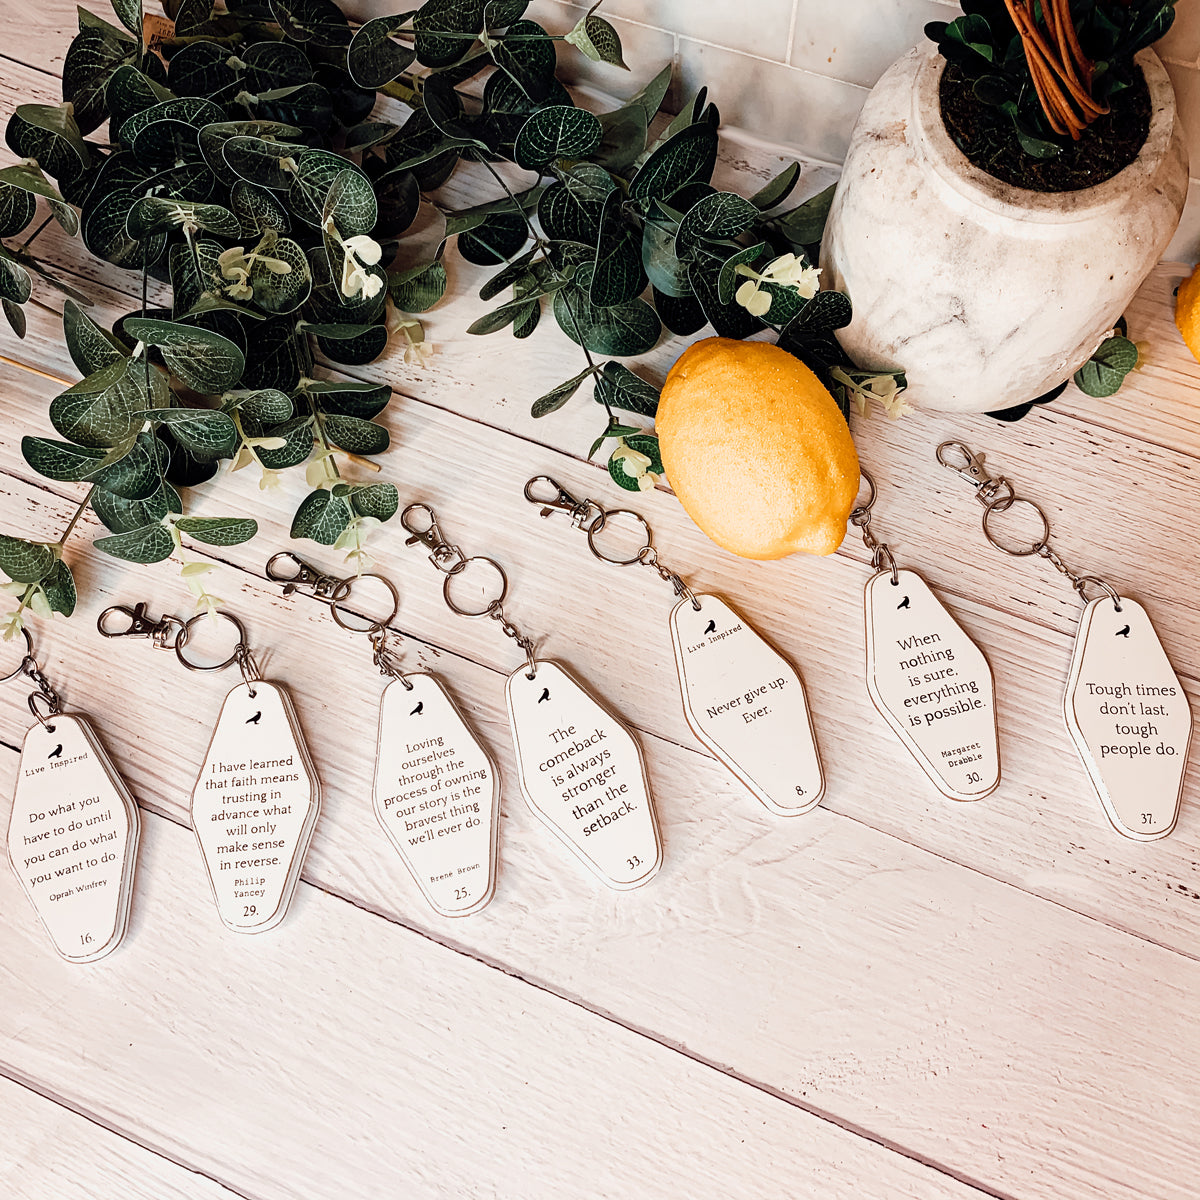 GIA Roma Inspirational Stocking Stuffer Gifts - Wooden Keychains w/ Motivational Words - Maya Angelou Quote Gifts Alone